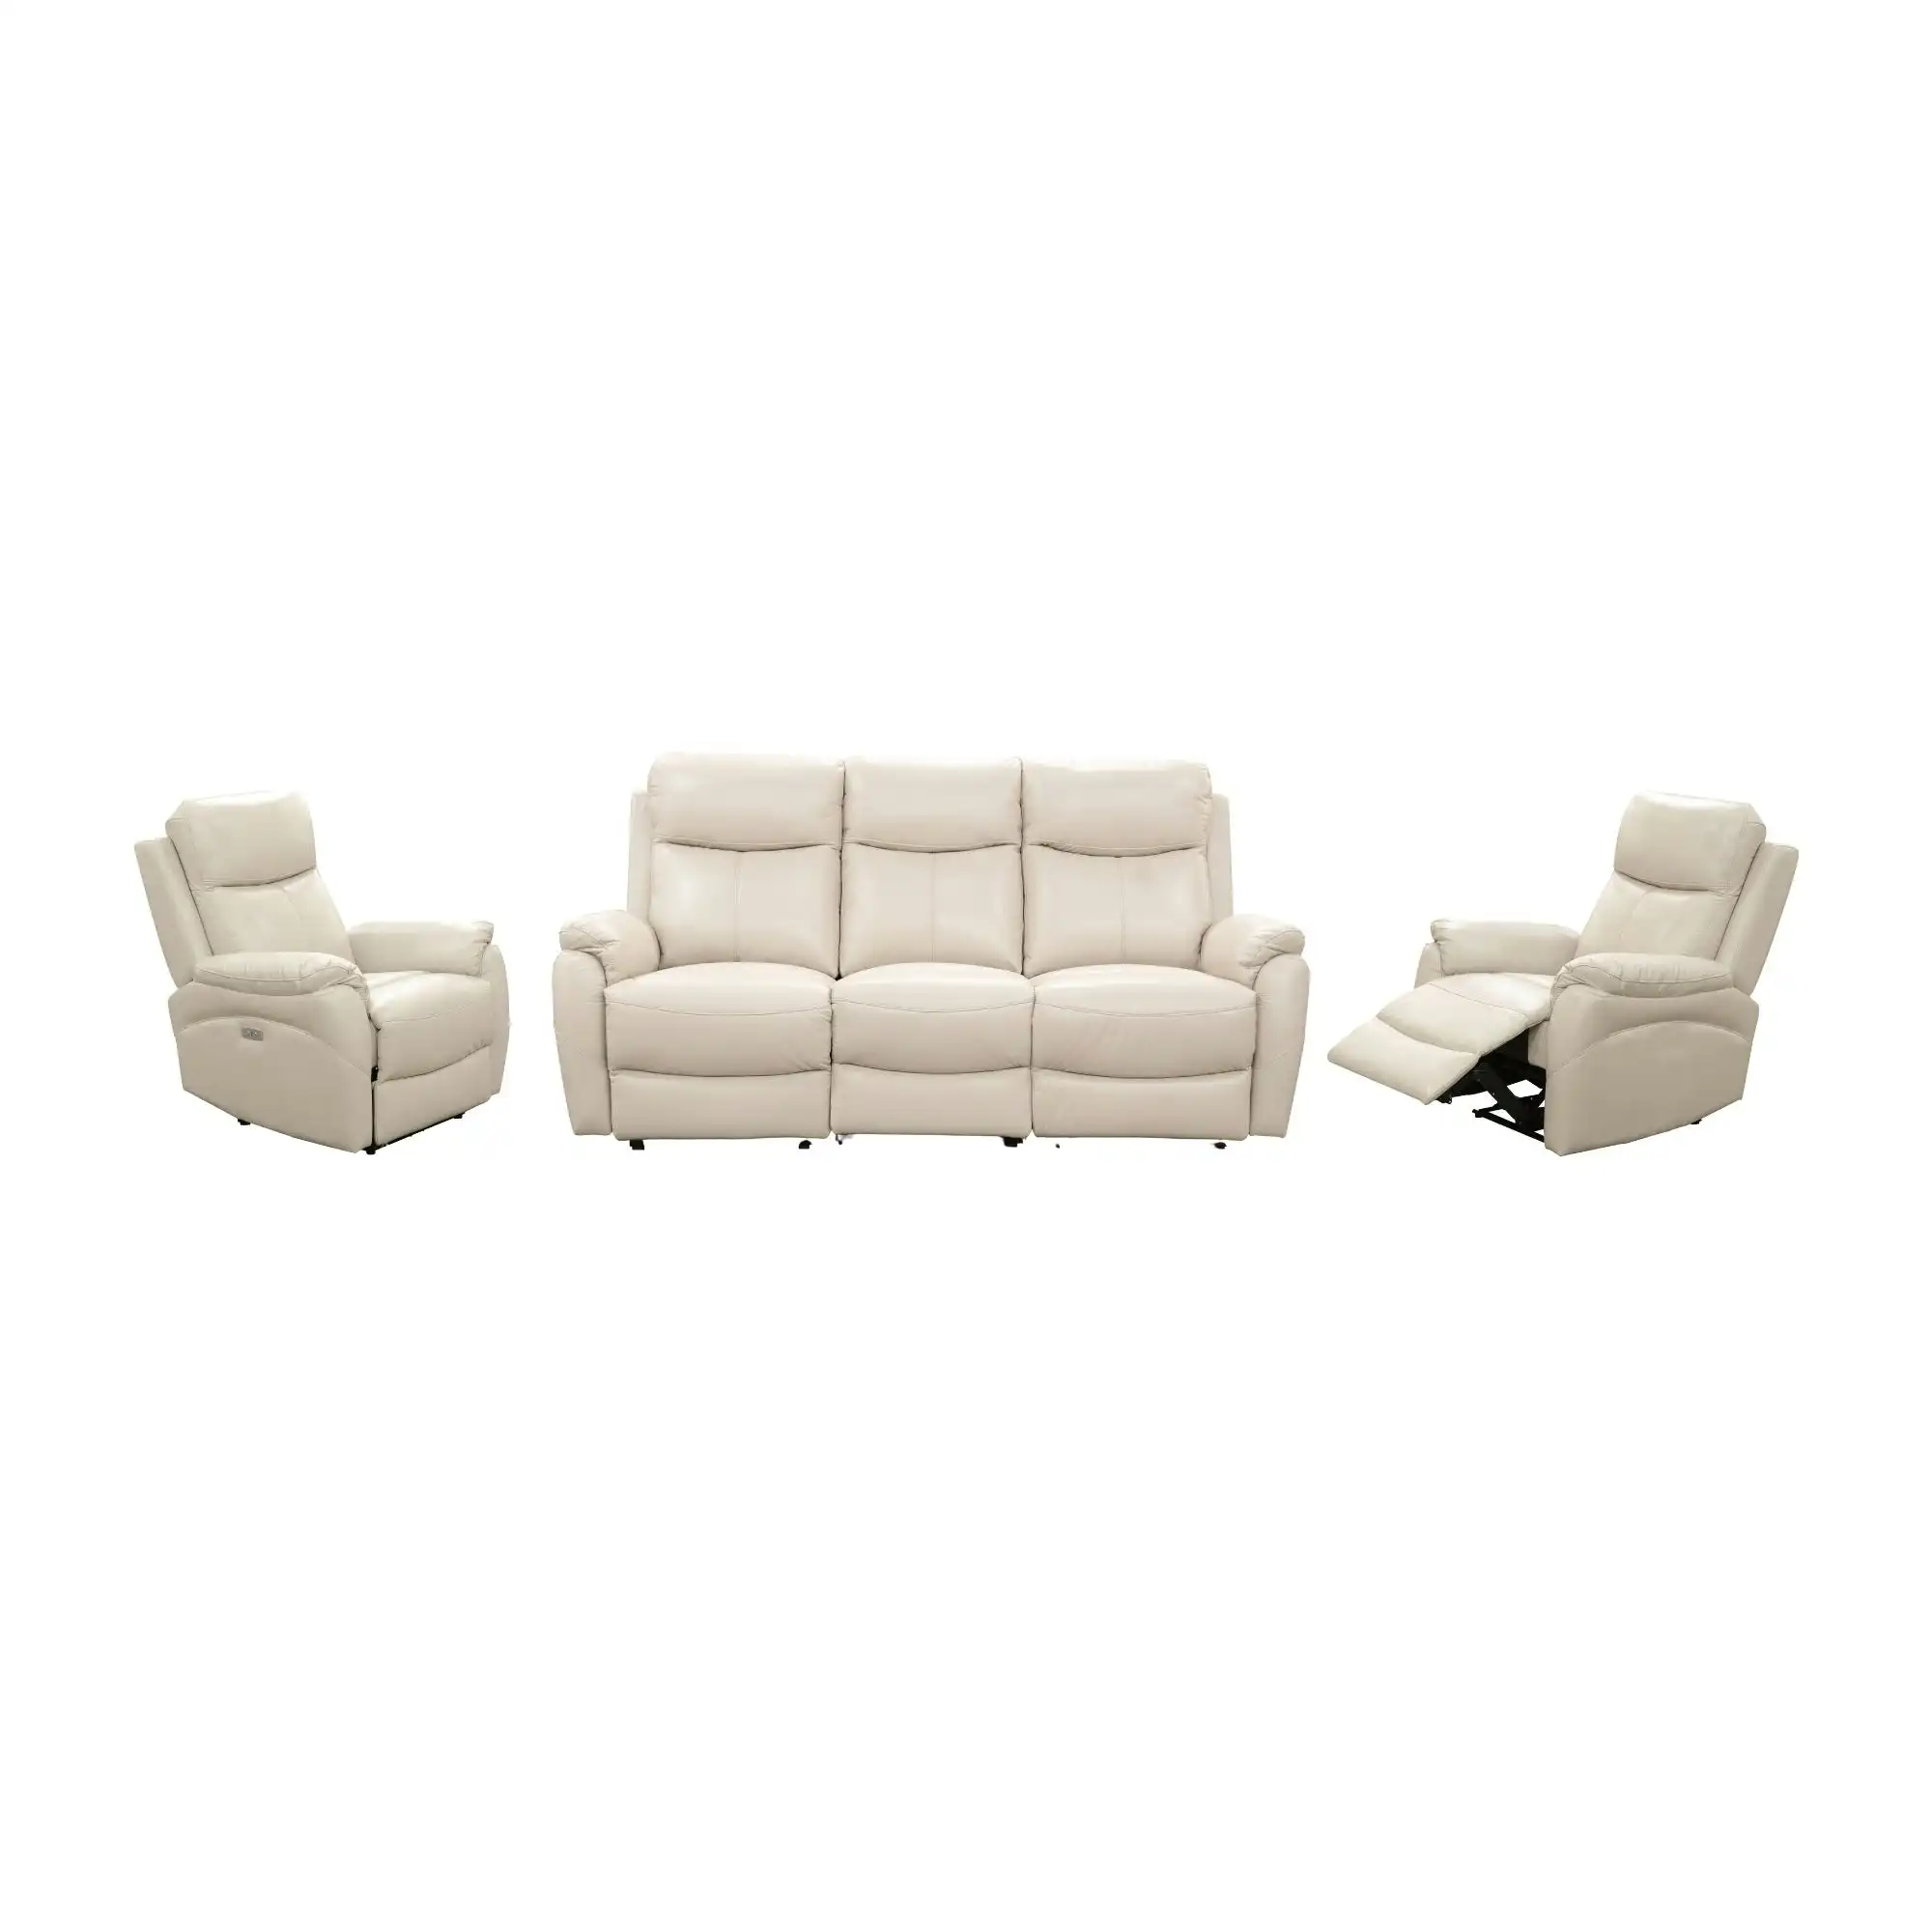 Berkeley 3+1+1 Electric Leather Recliner Sofa Set Silver